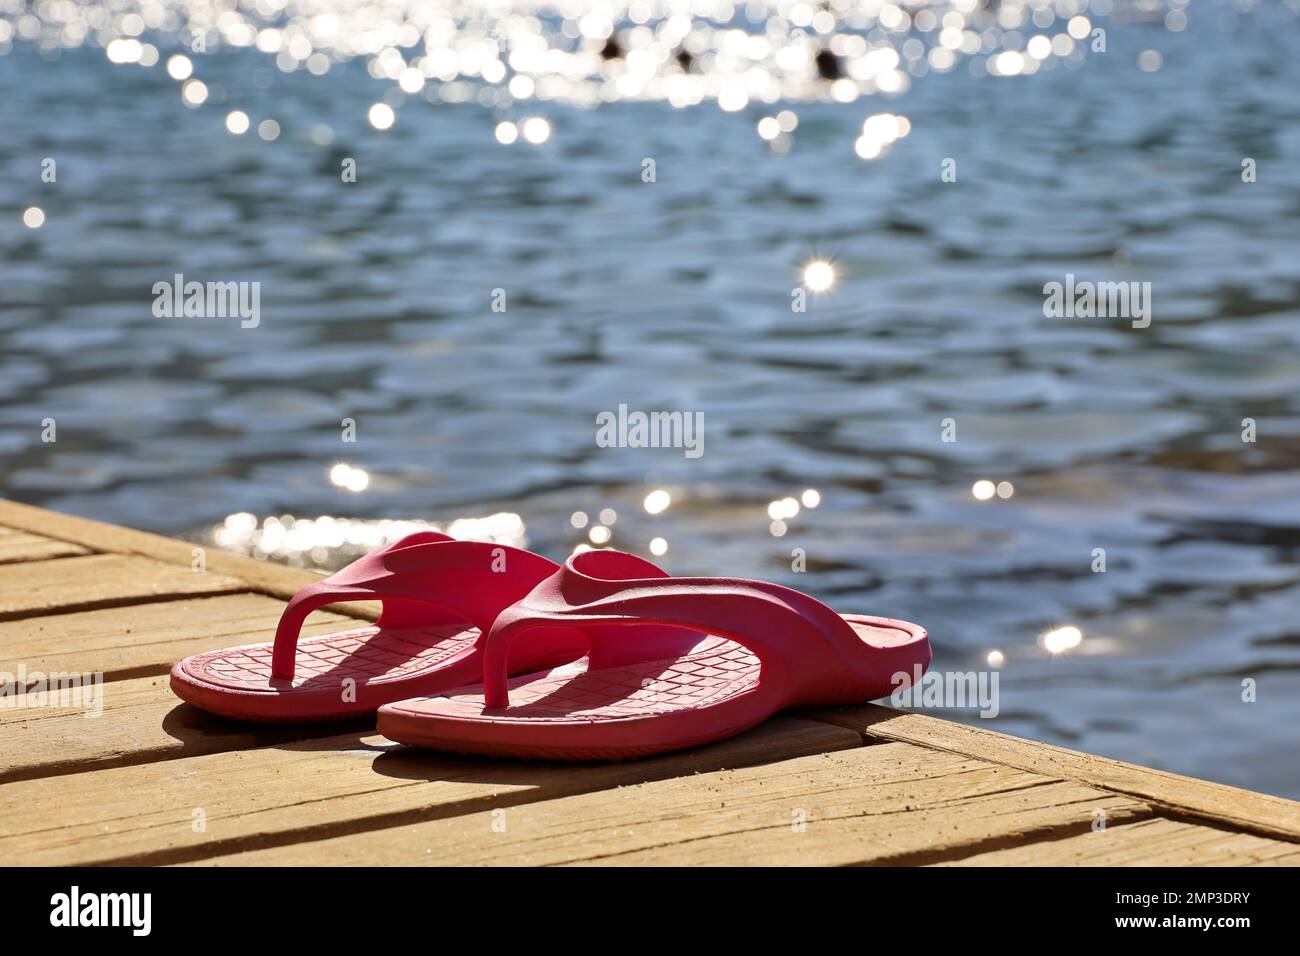 Holidays on a beach, pink female flip-flops on wooden boards on background of shining sea waves and swimming people Stock Photo